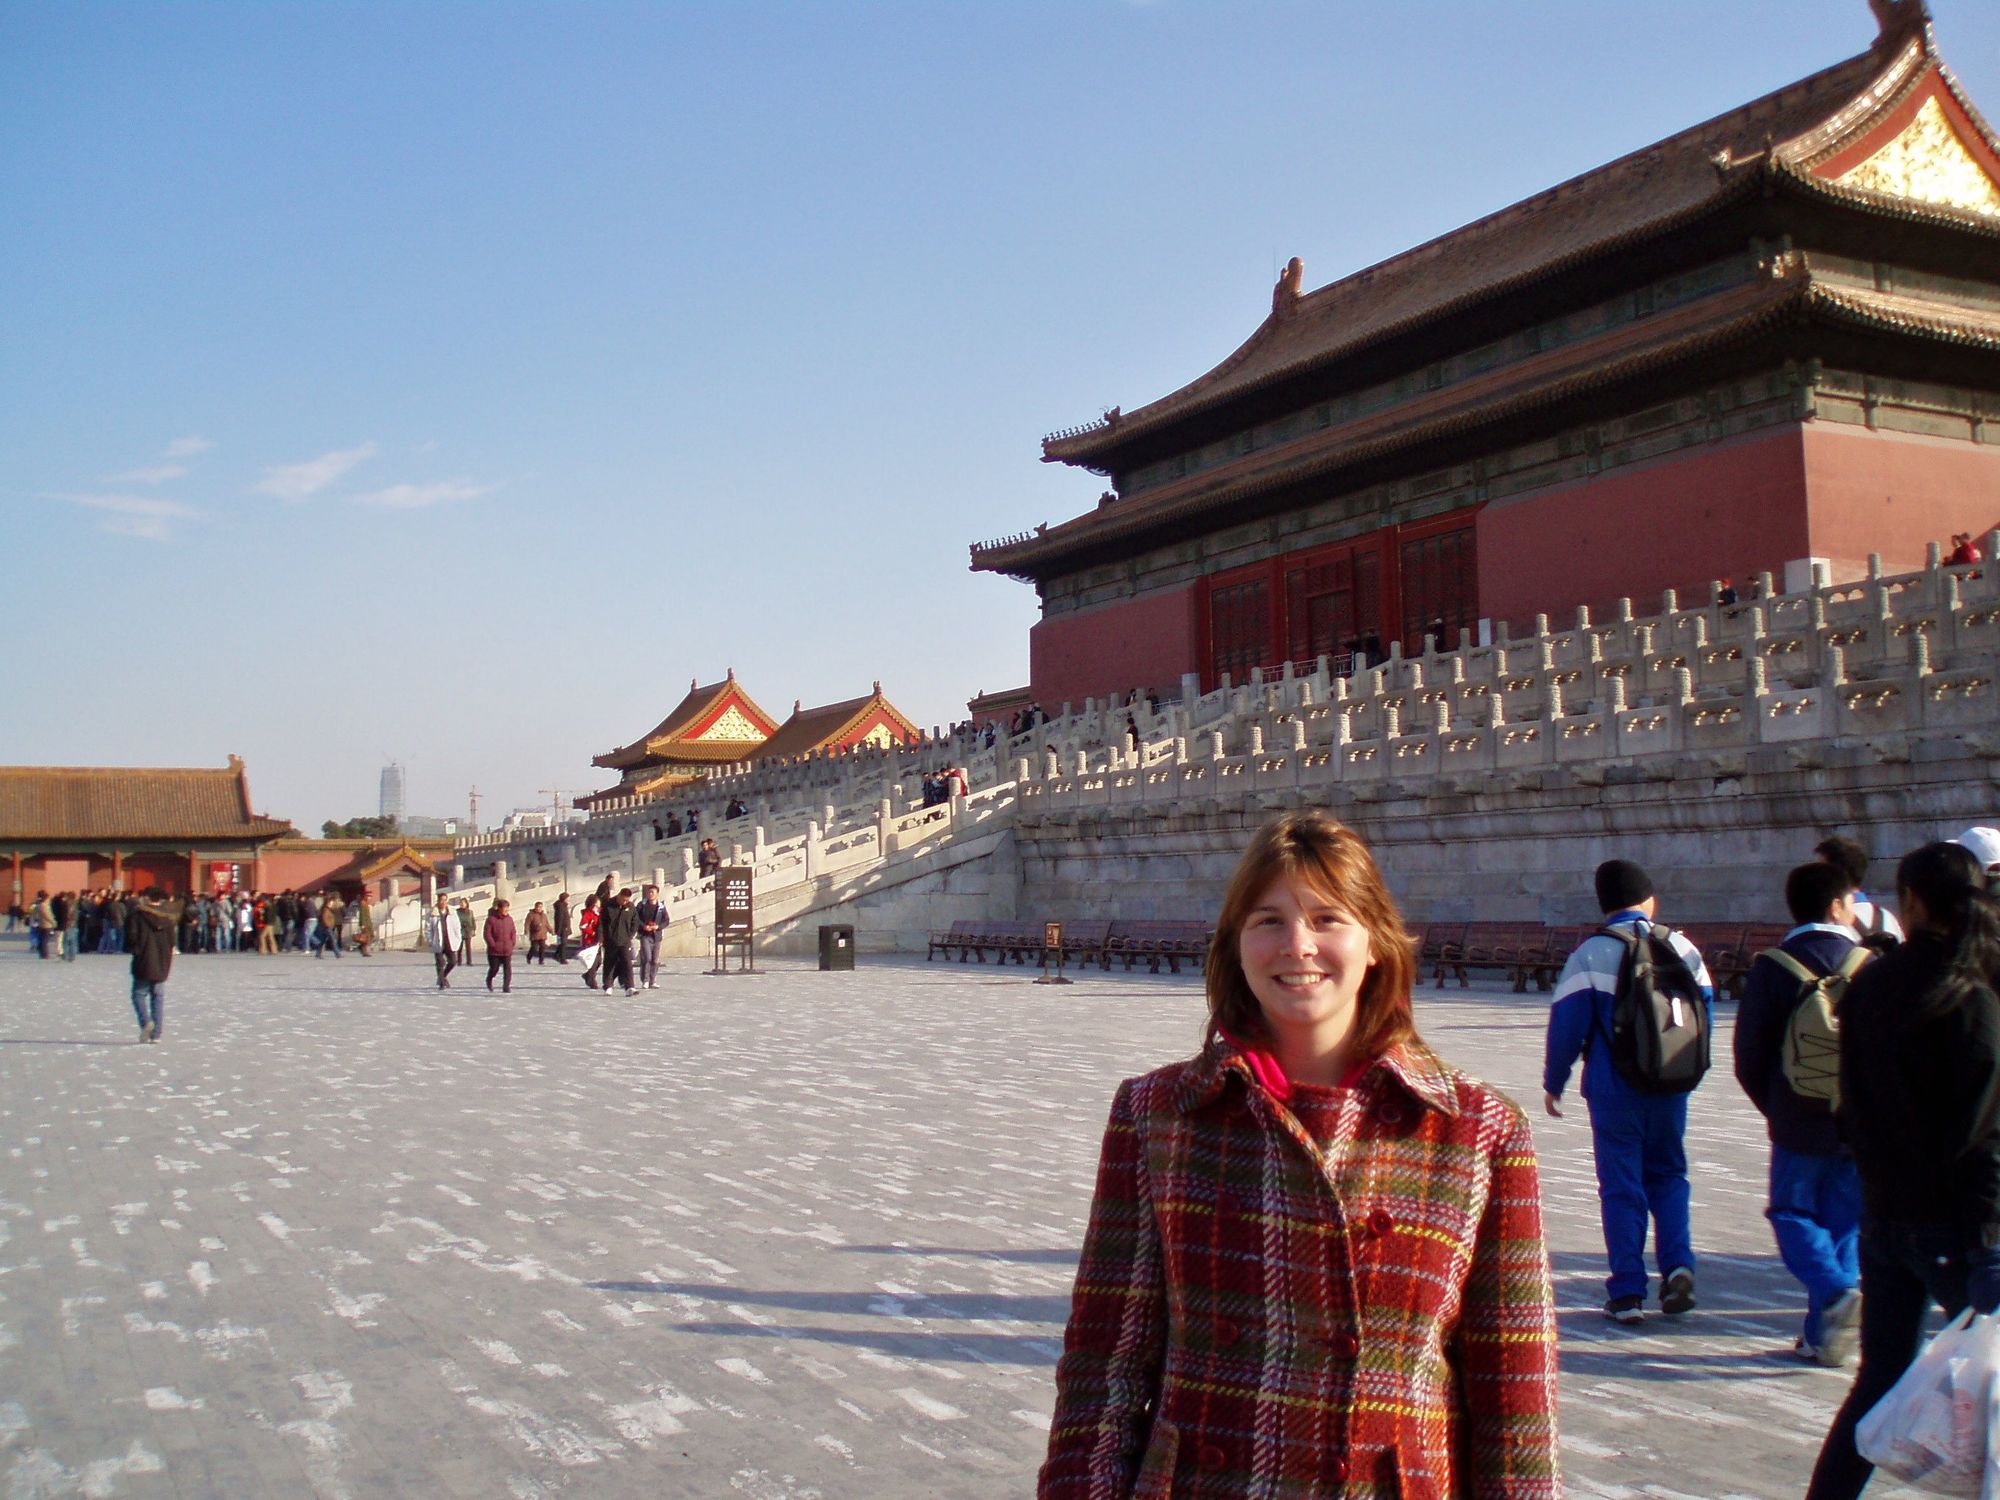 Visiting the Forbidden City in China